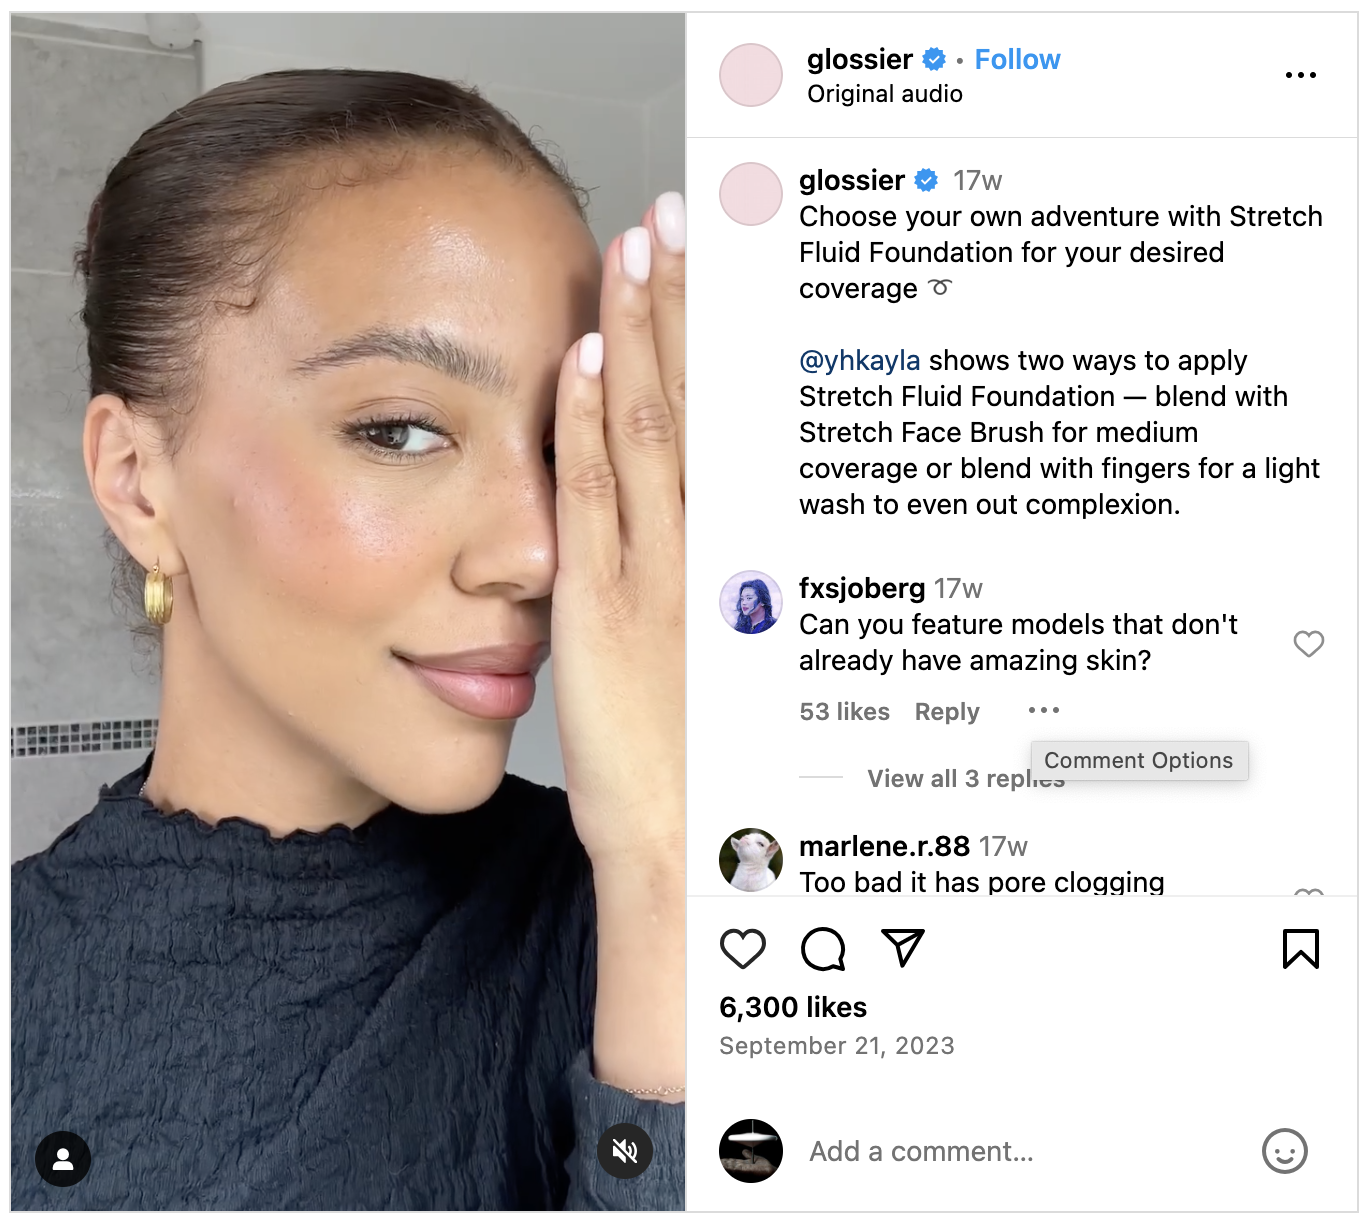 An influencer post published by Glossier on its Instagram handle